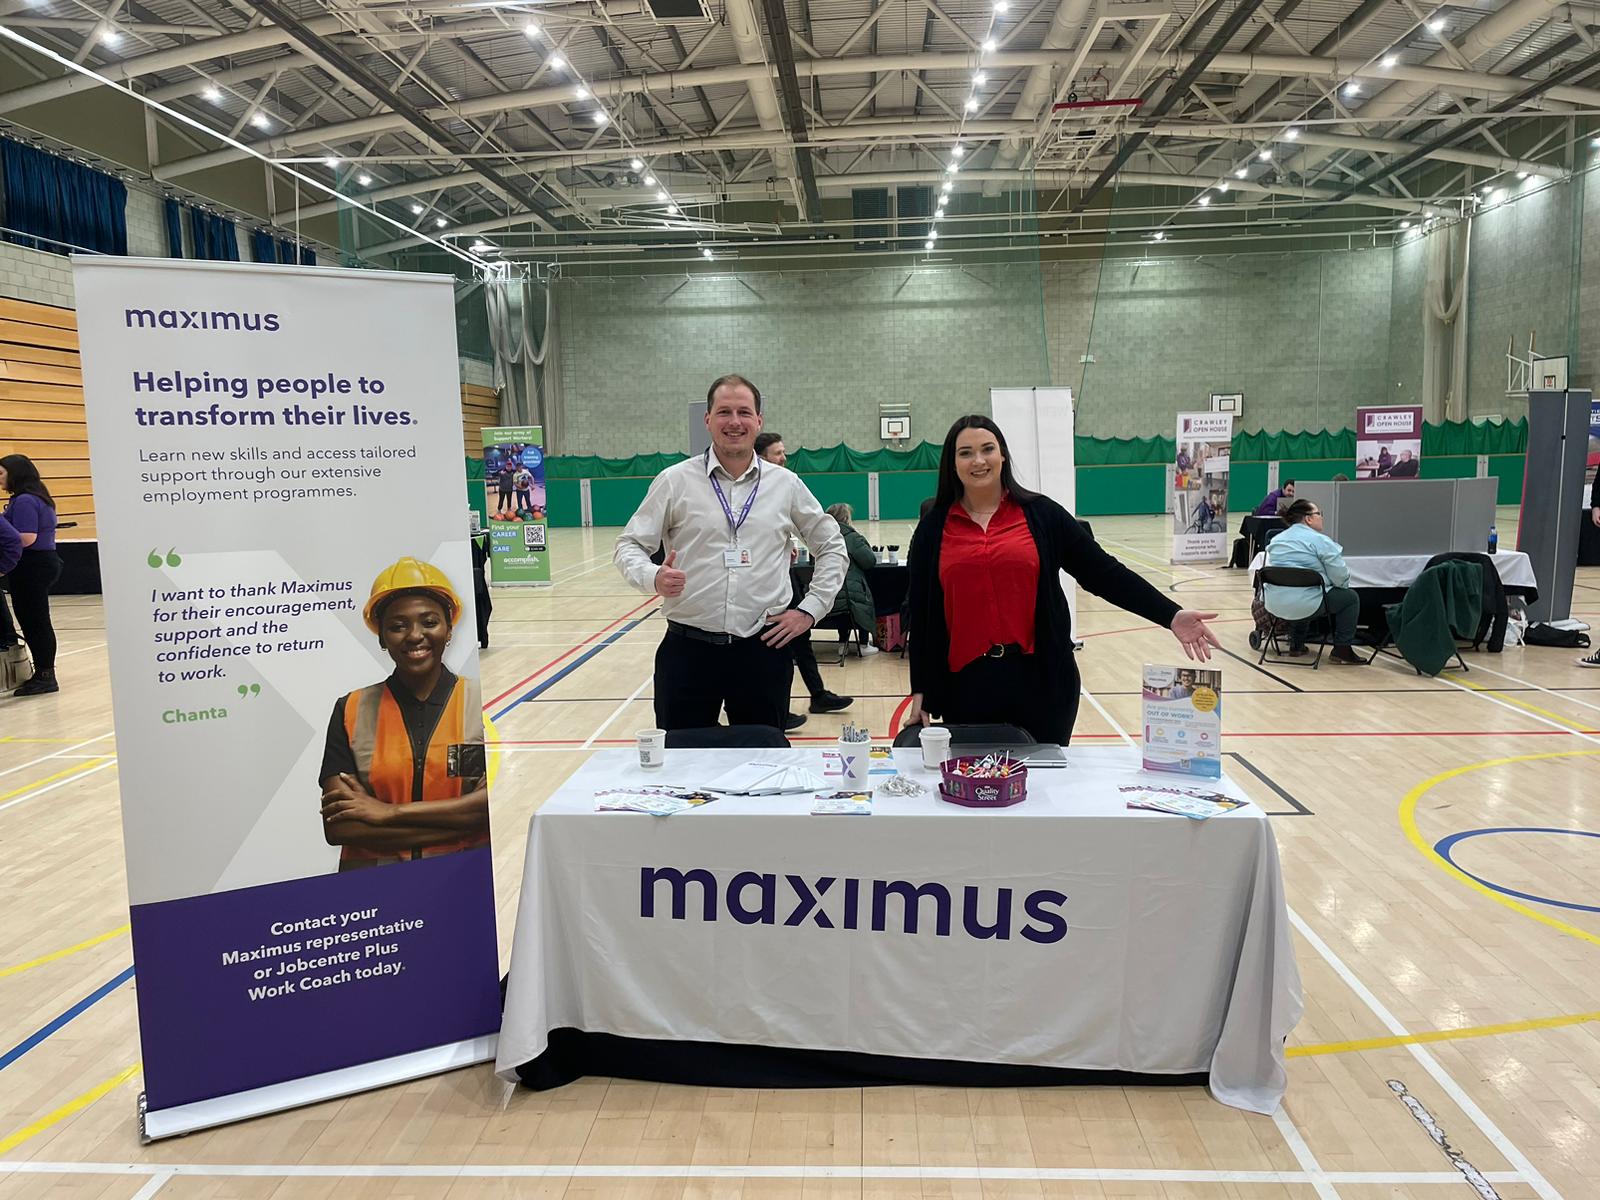 Maximus at our event in Crawley